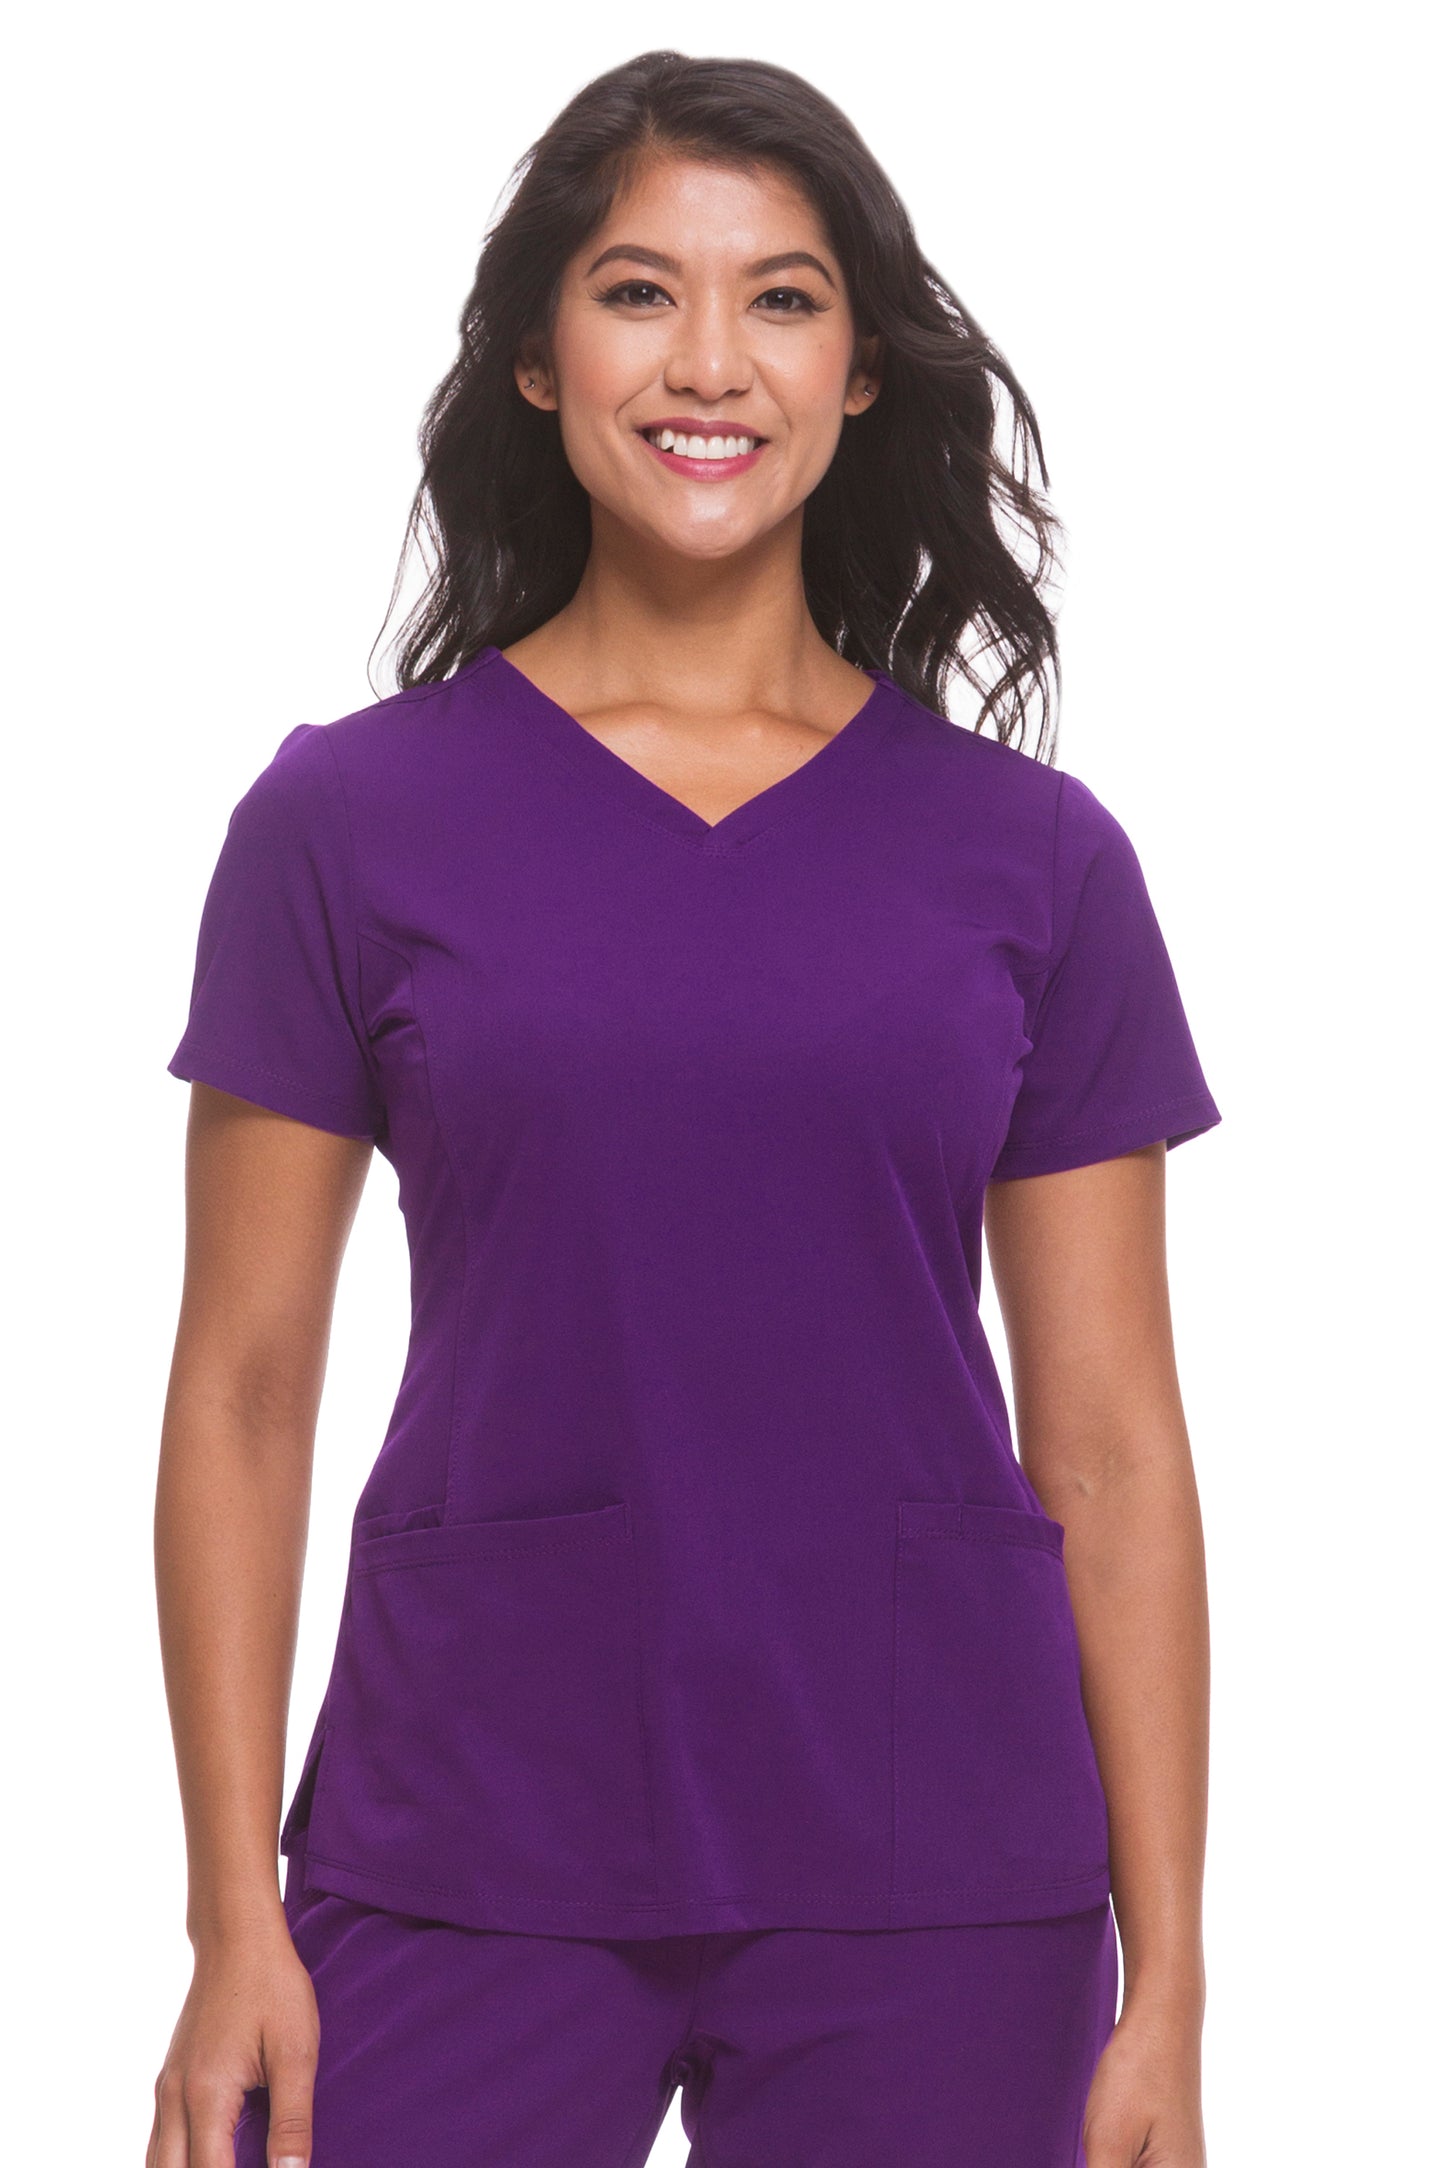 Healing Hands HH Works Monica V-Neck Scrub Top in Eggplant at Parker's Clothing and Shoes